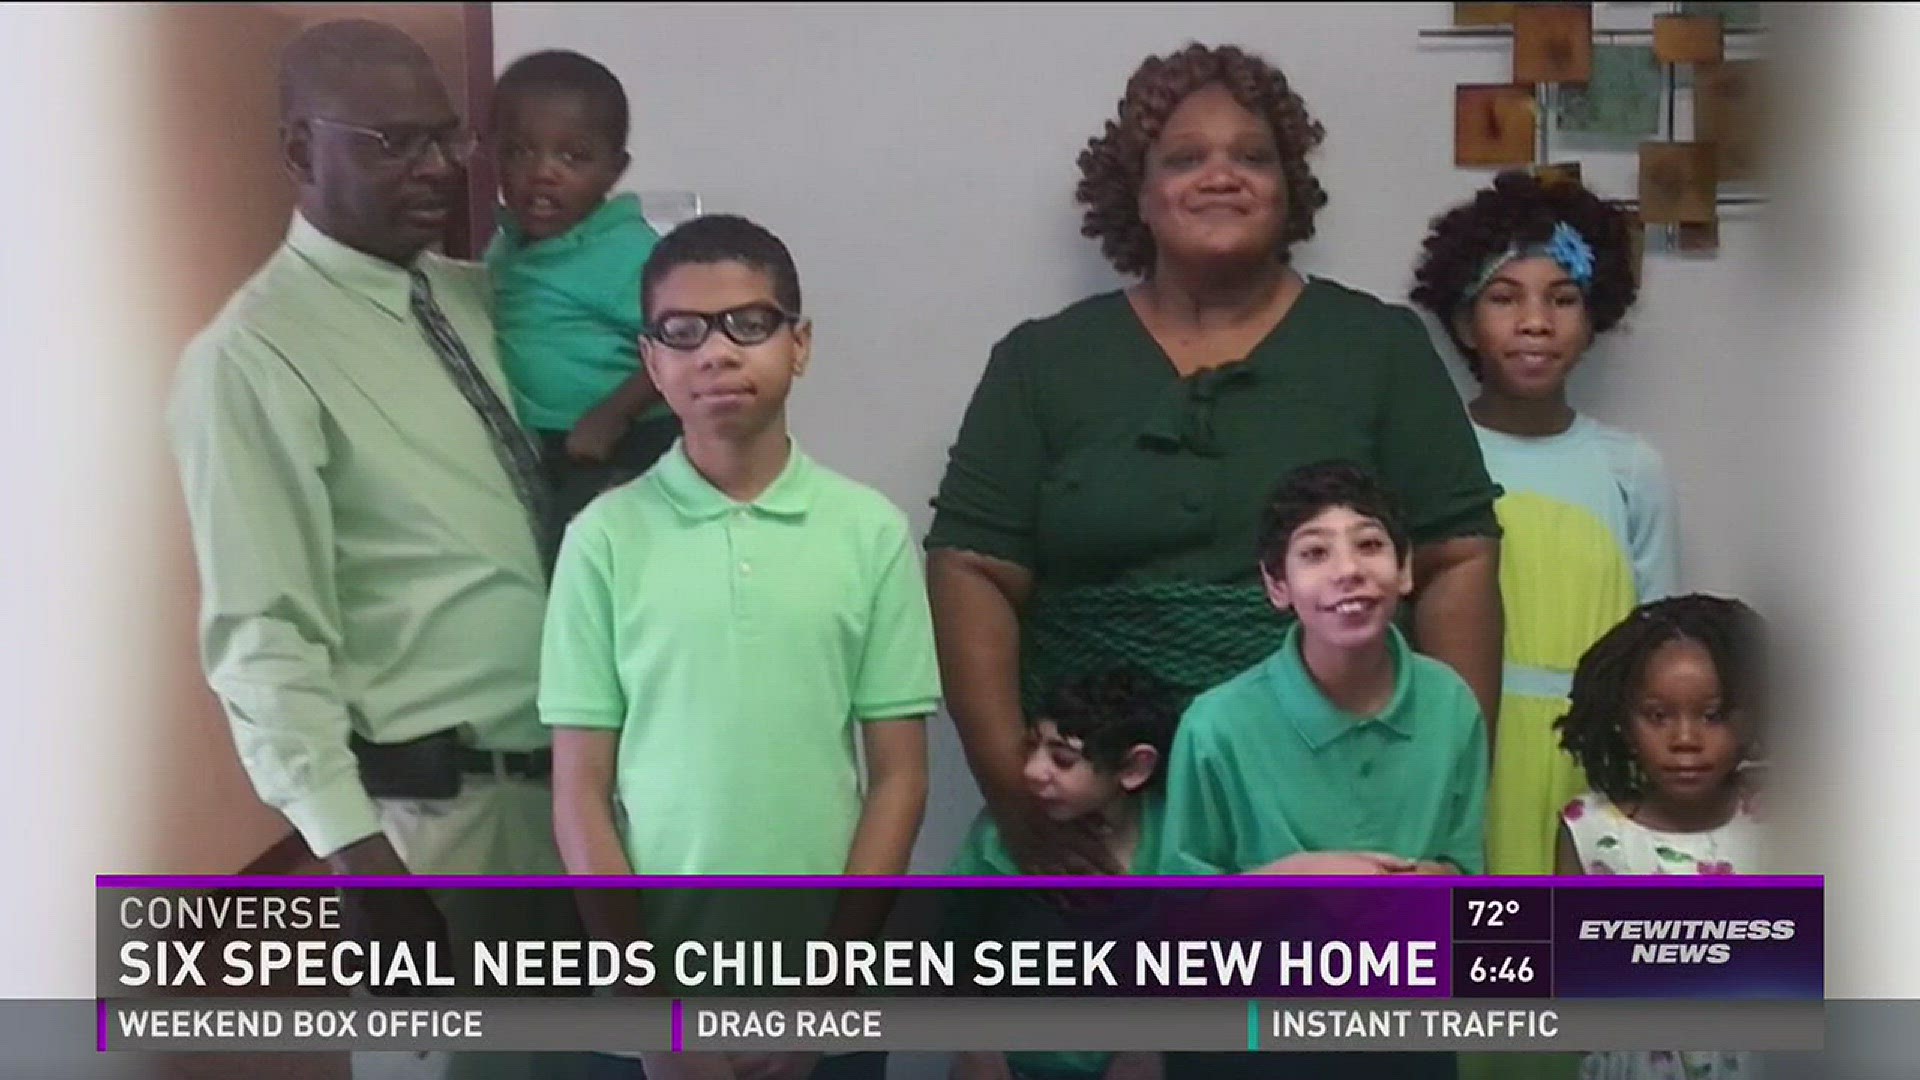 Family with six special needs children seek new home